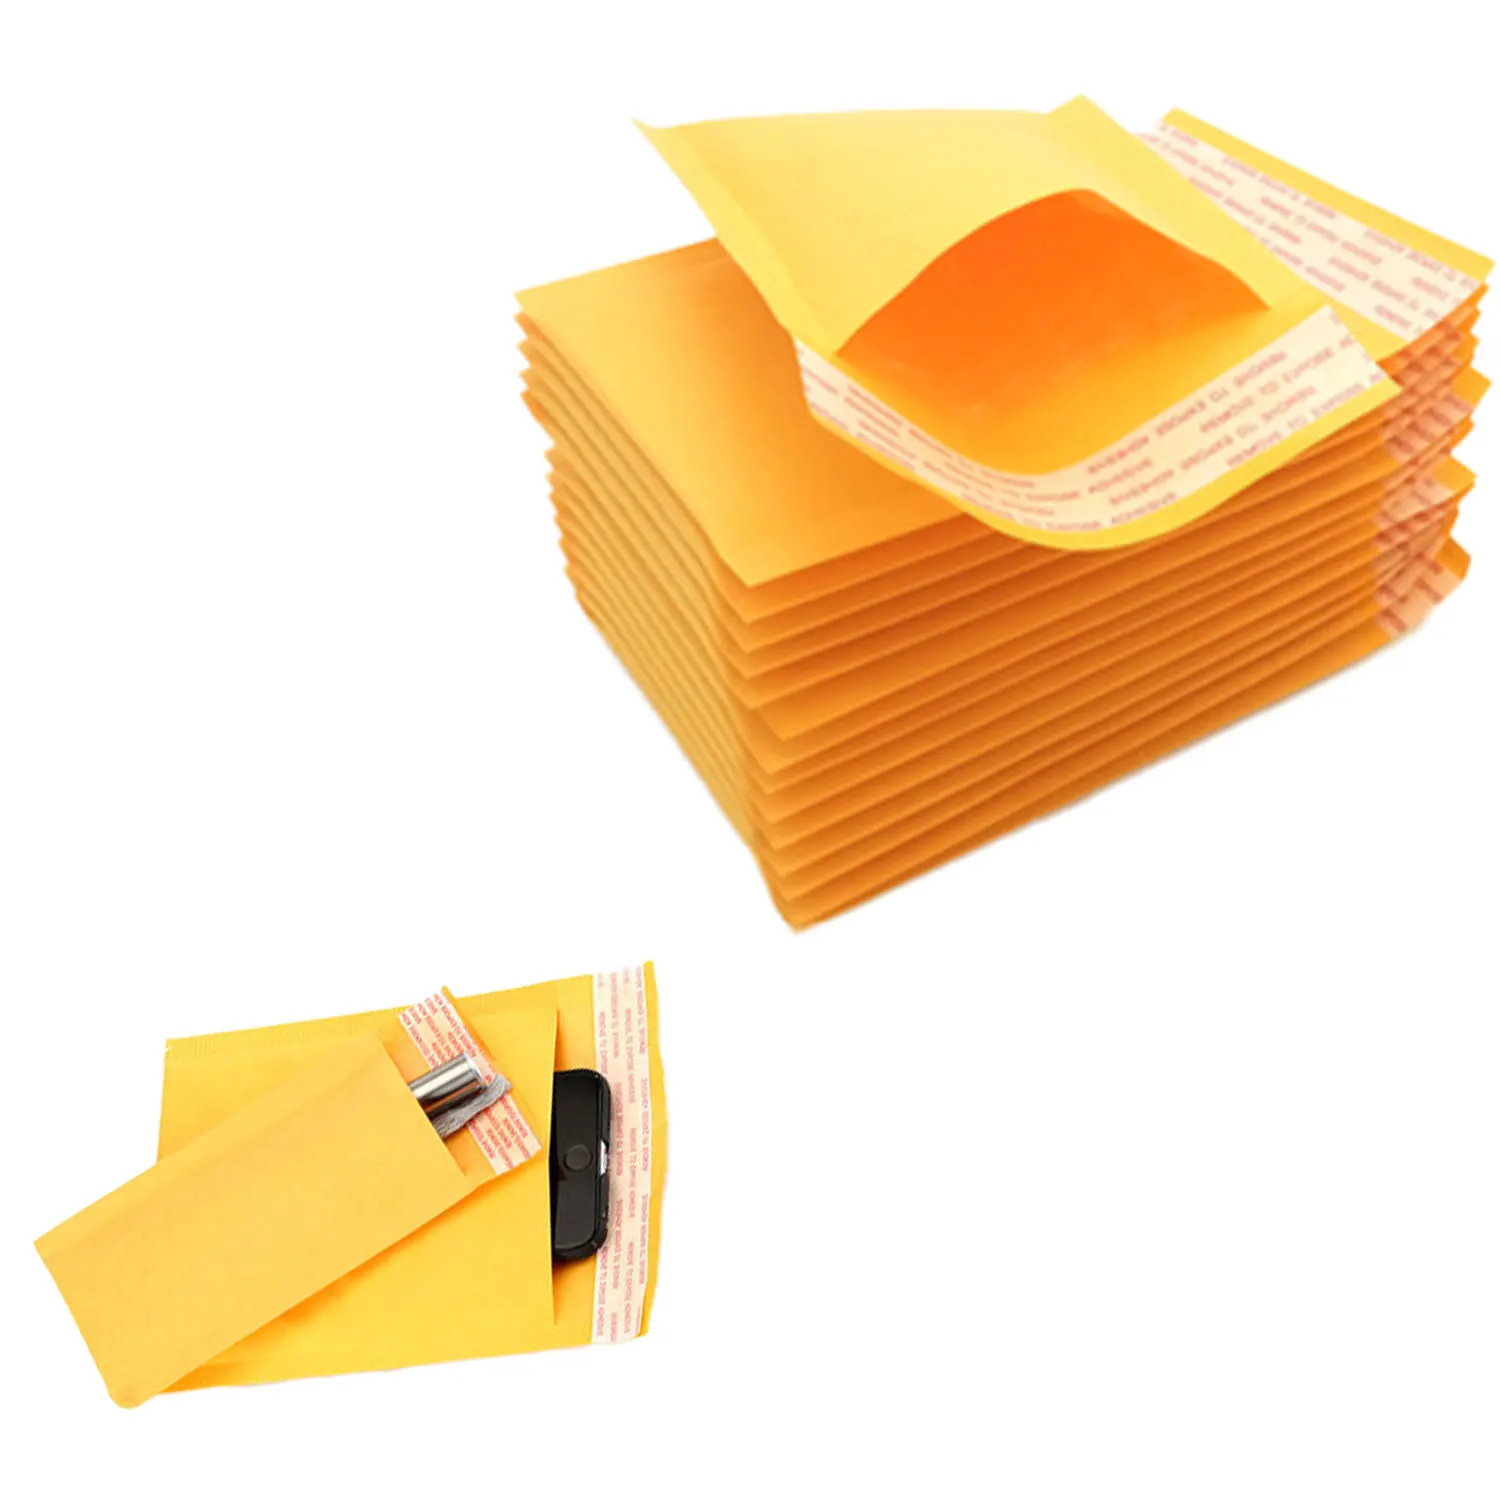 

11*13CM 50pcs Bubble Envelope Bag Yellow Bubble PolyMailer Self Seal Mailing Bags Padded Envelopes For Magazine Lined Mailer